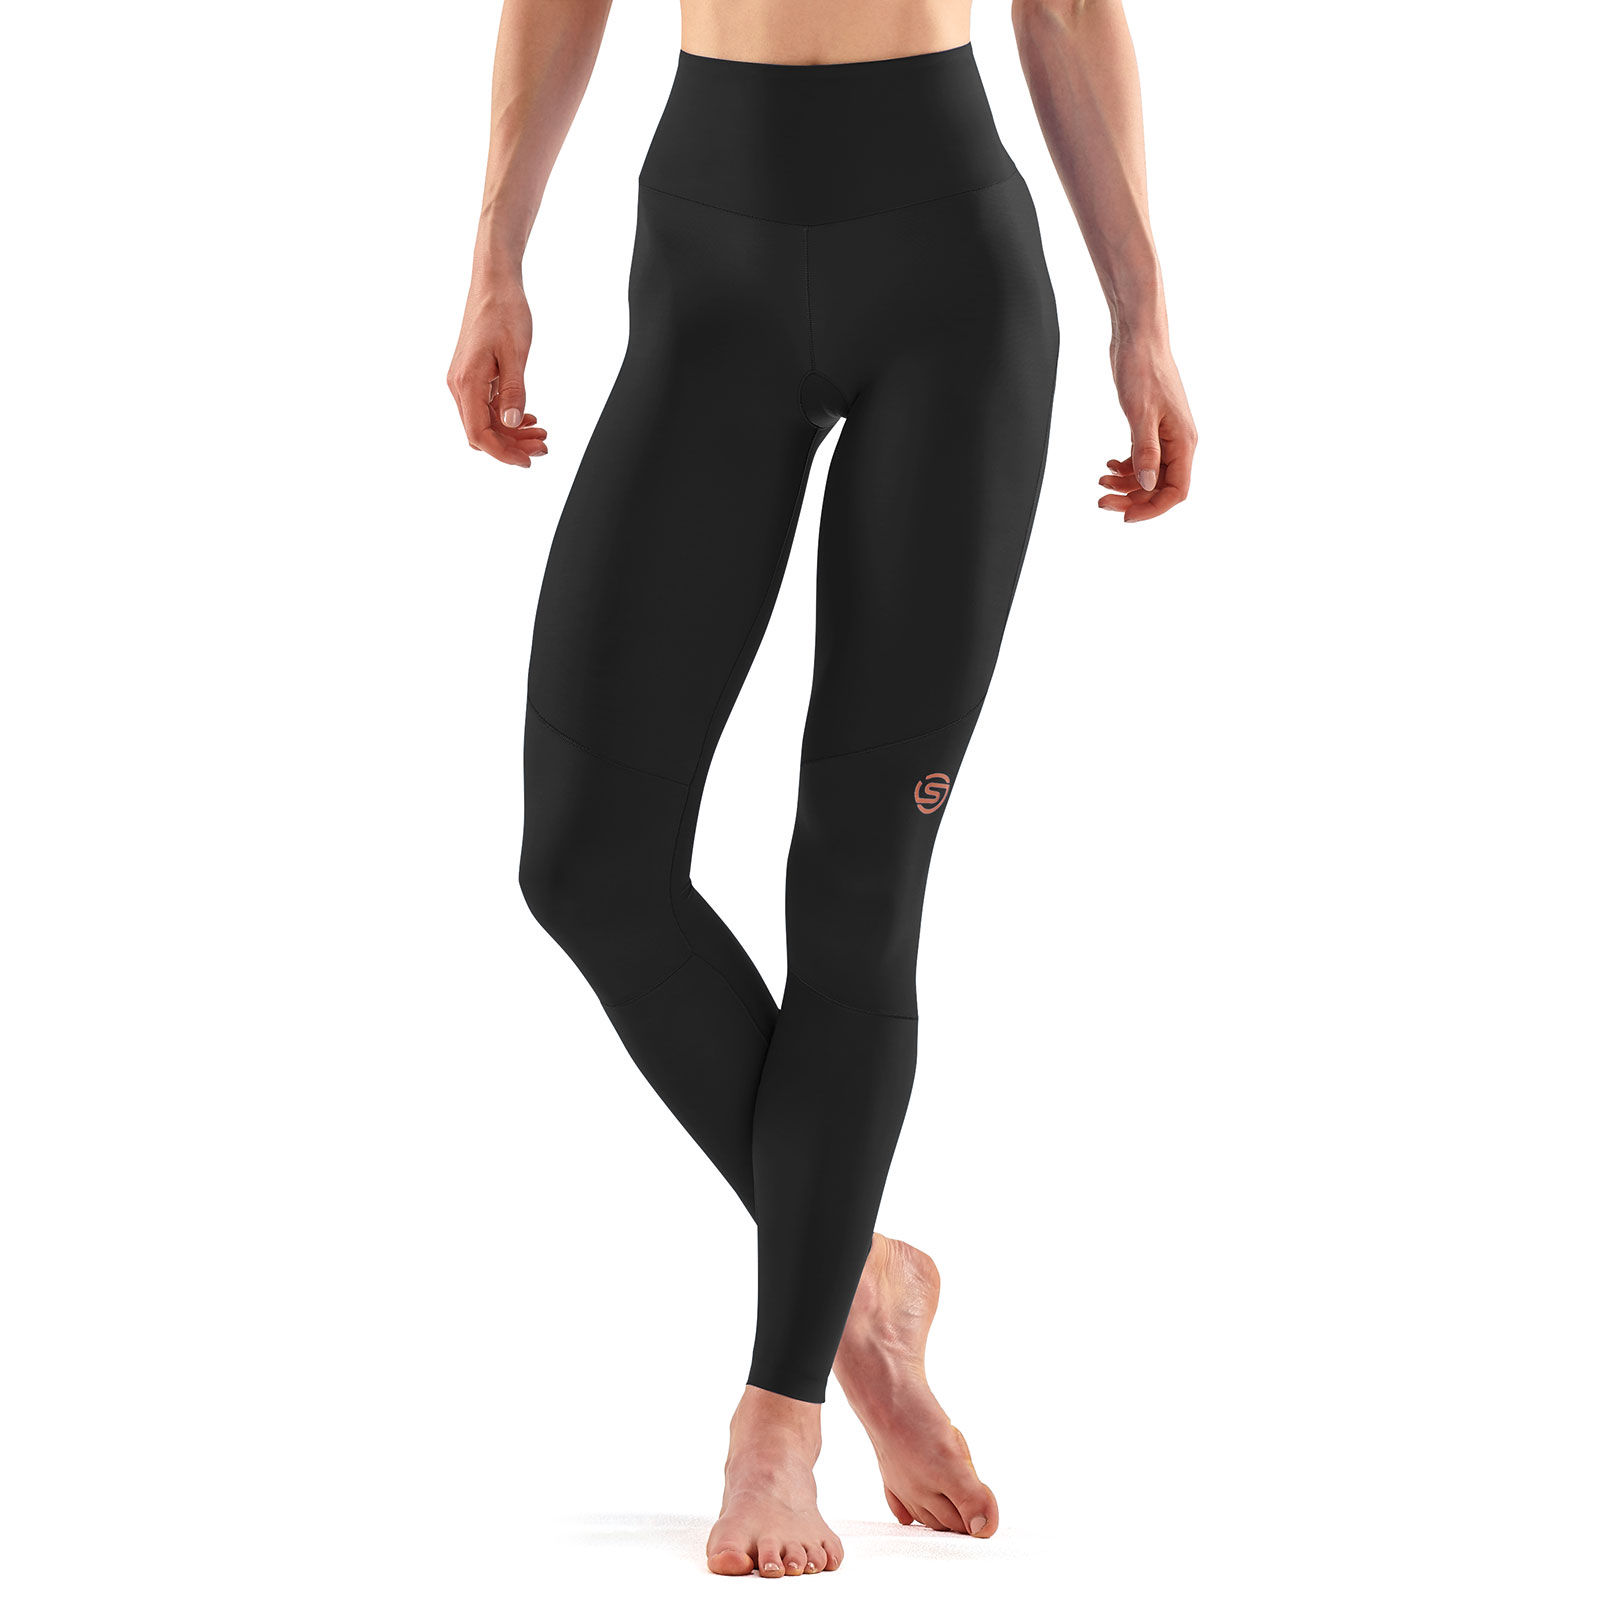 SKINS SERIES-3 WOMEN'S TRAVEL AND RECOVERY LONG TIGHTS BLACK